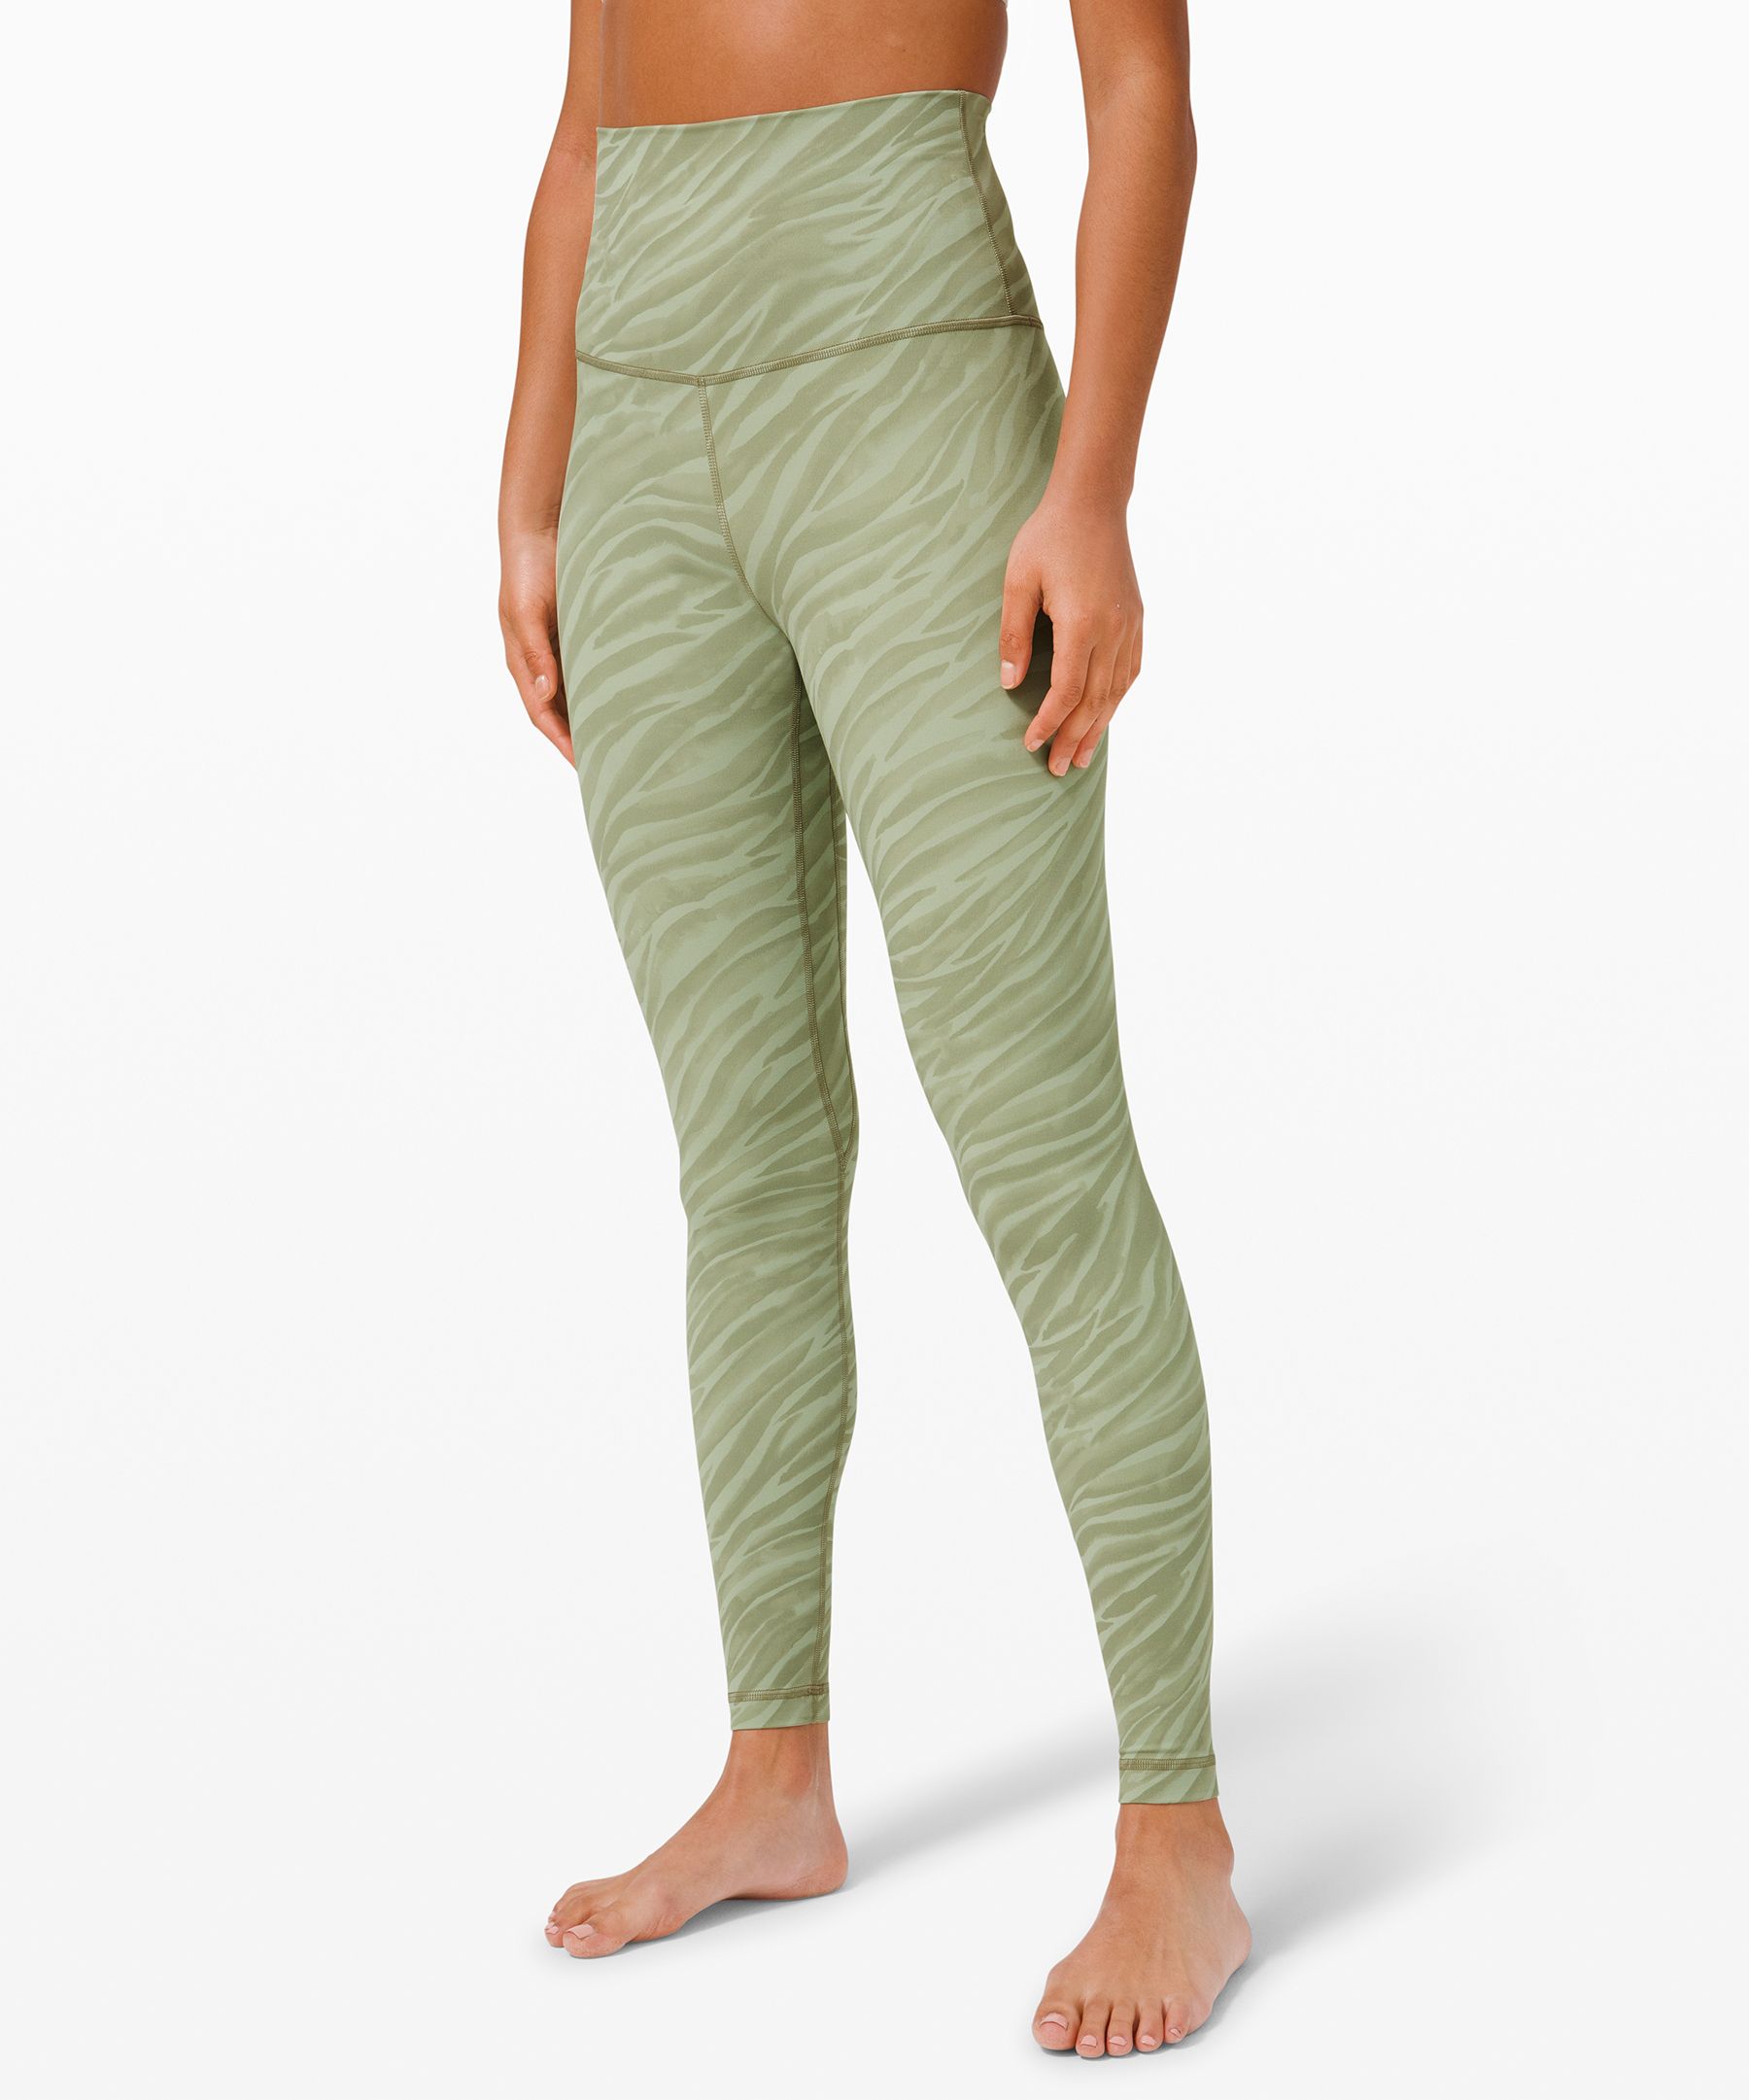 Lululemon Align™ Super High-rise Pant 28" *online Only In Printed